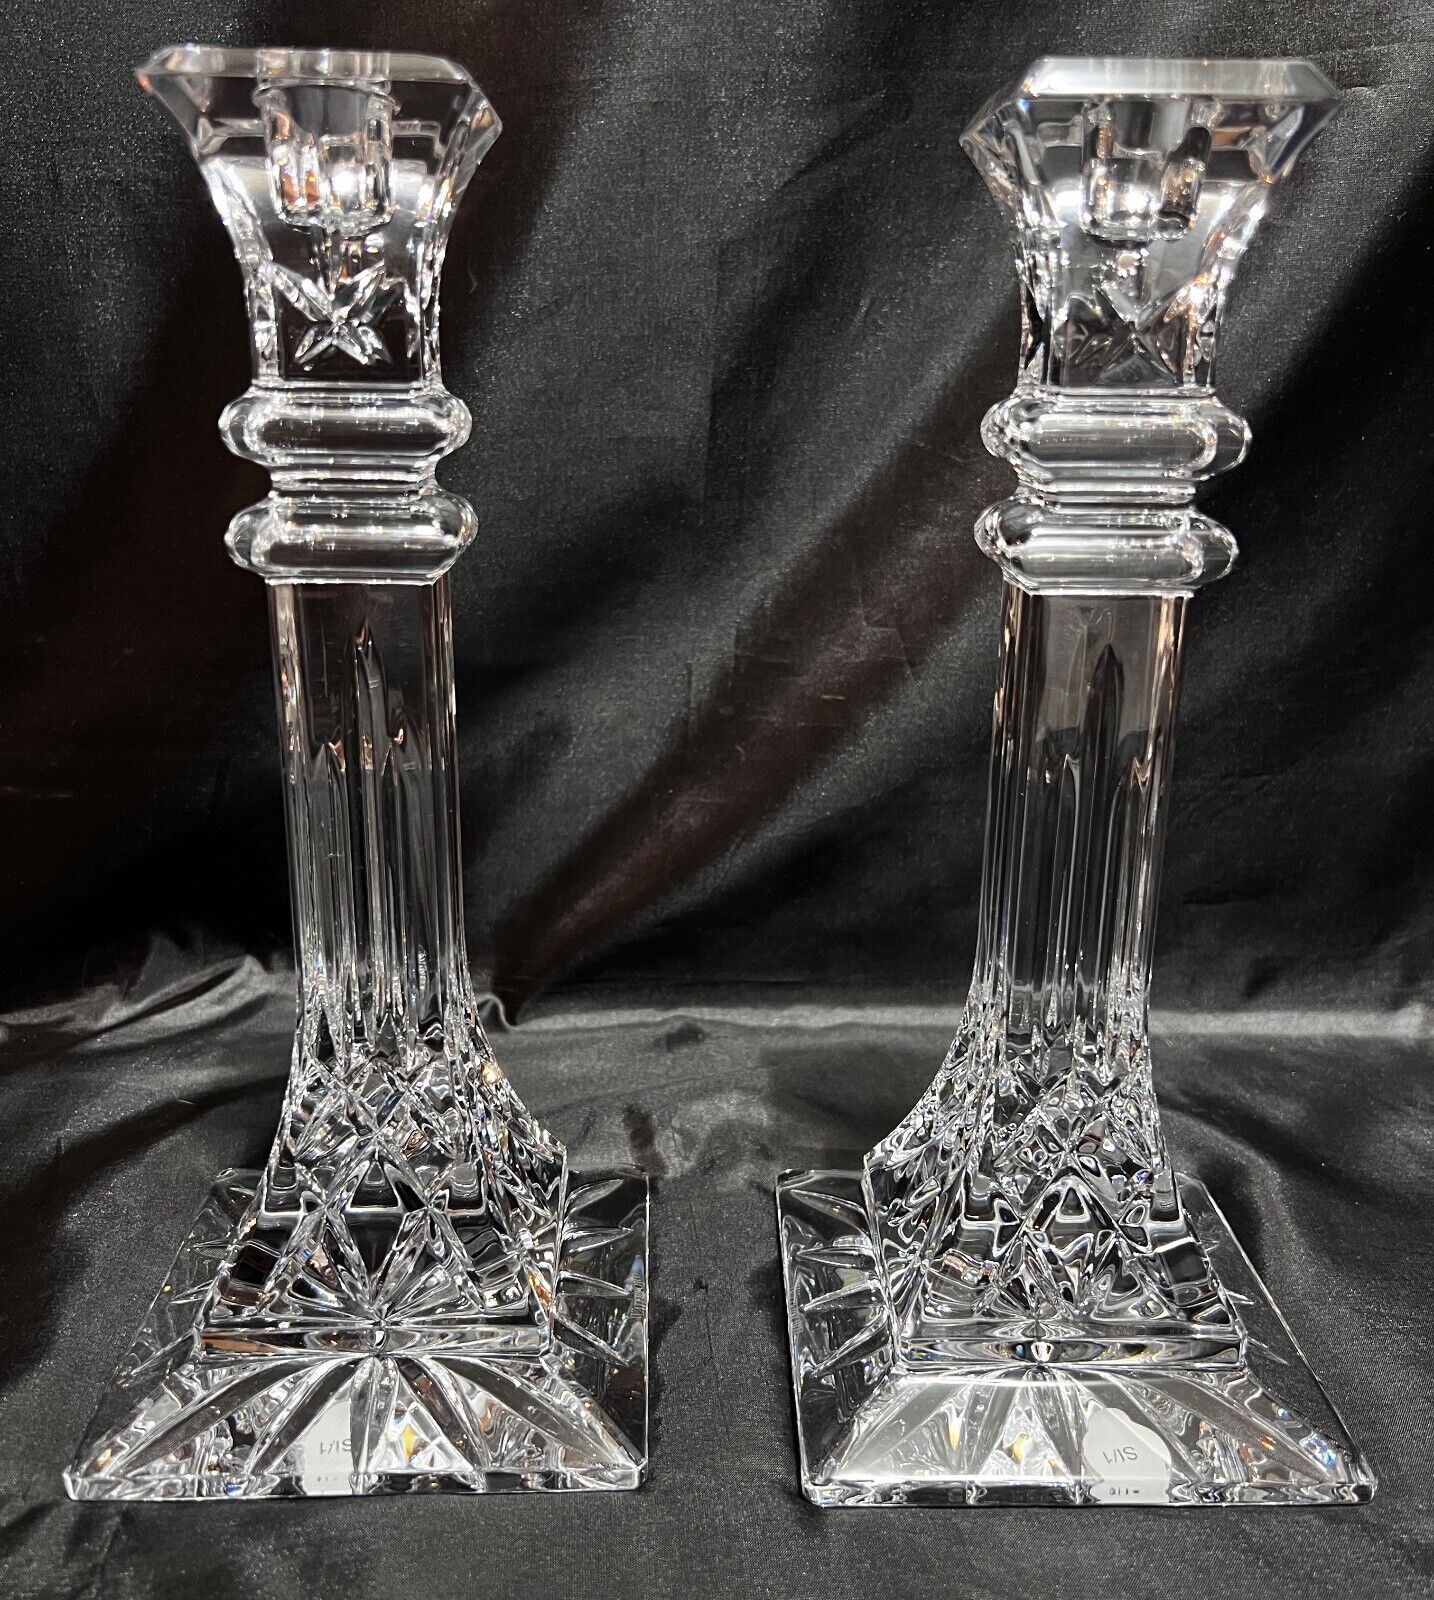 STUNNING Pair of Waterford Crystal “Lismore” 10” Candlesticks Near Mint